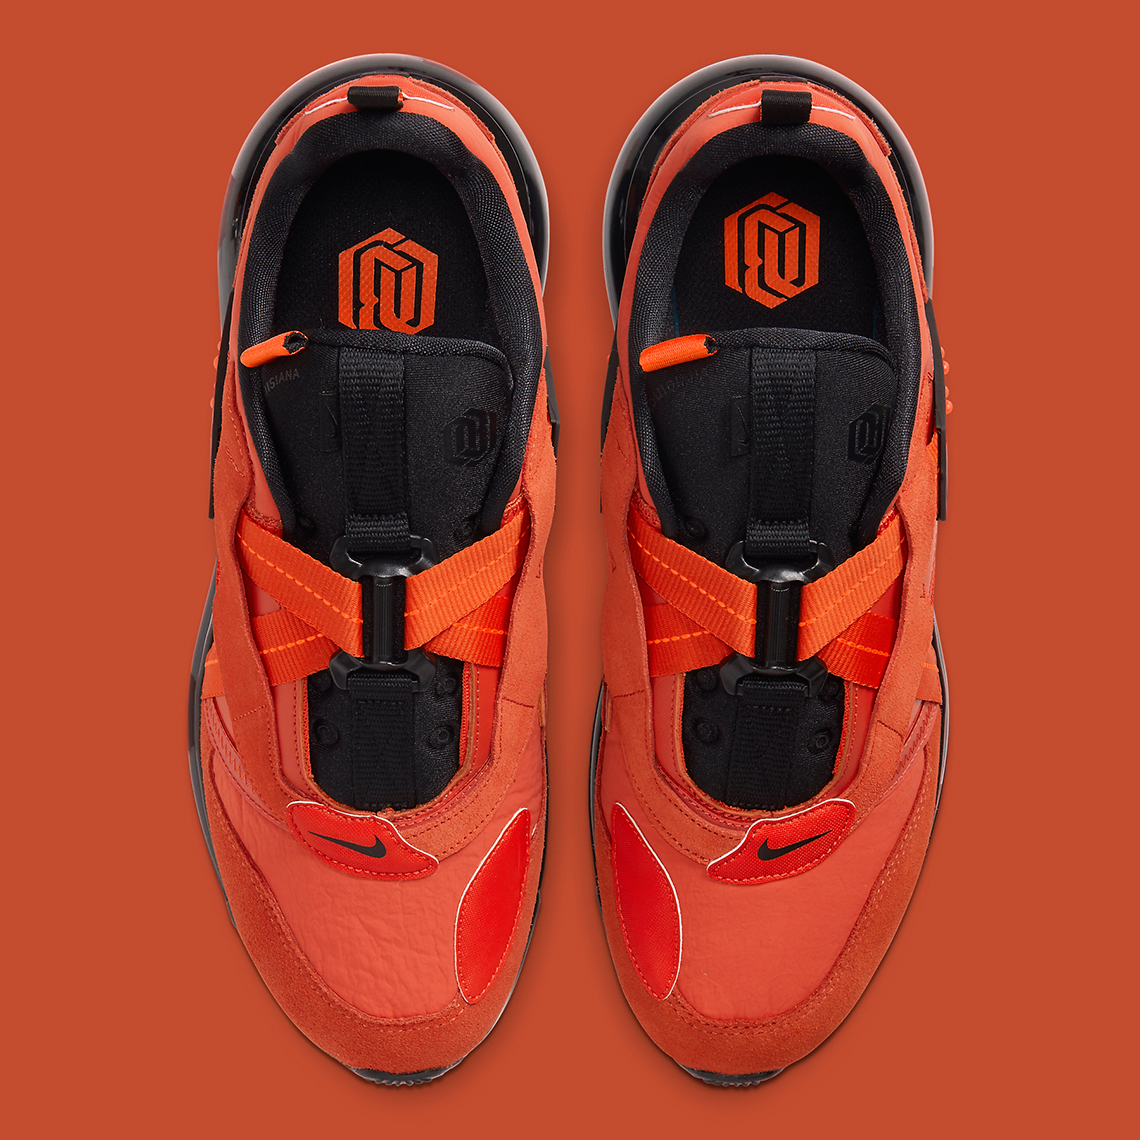 OBJ&#039;s Nike Air Max 720 Slip Coming In &quot;Browns&quot; Colorway: Photos